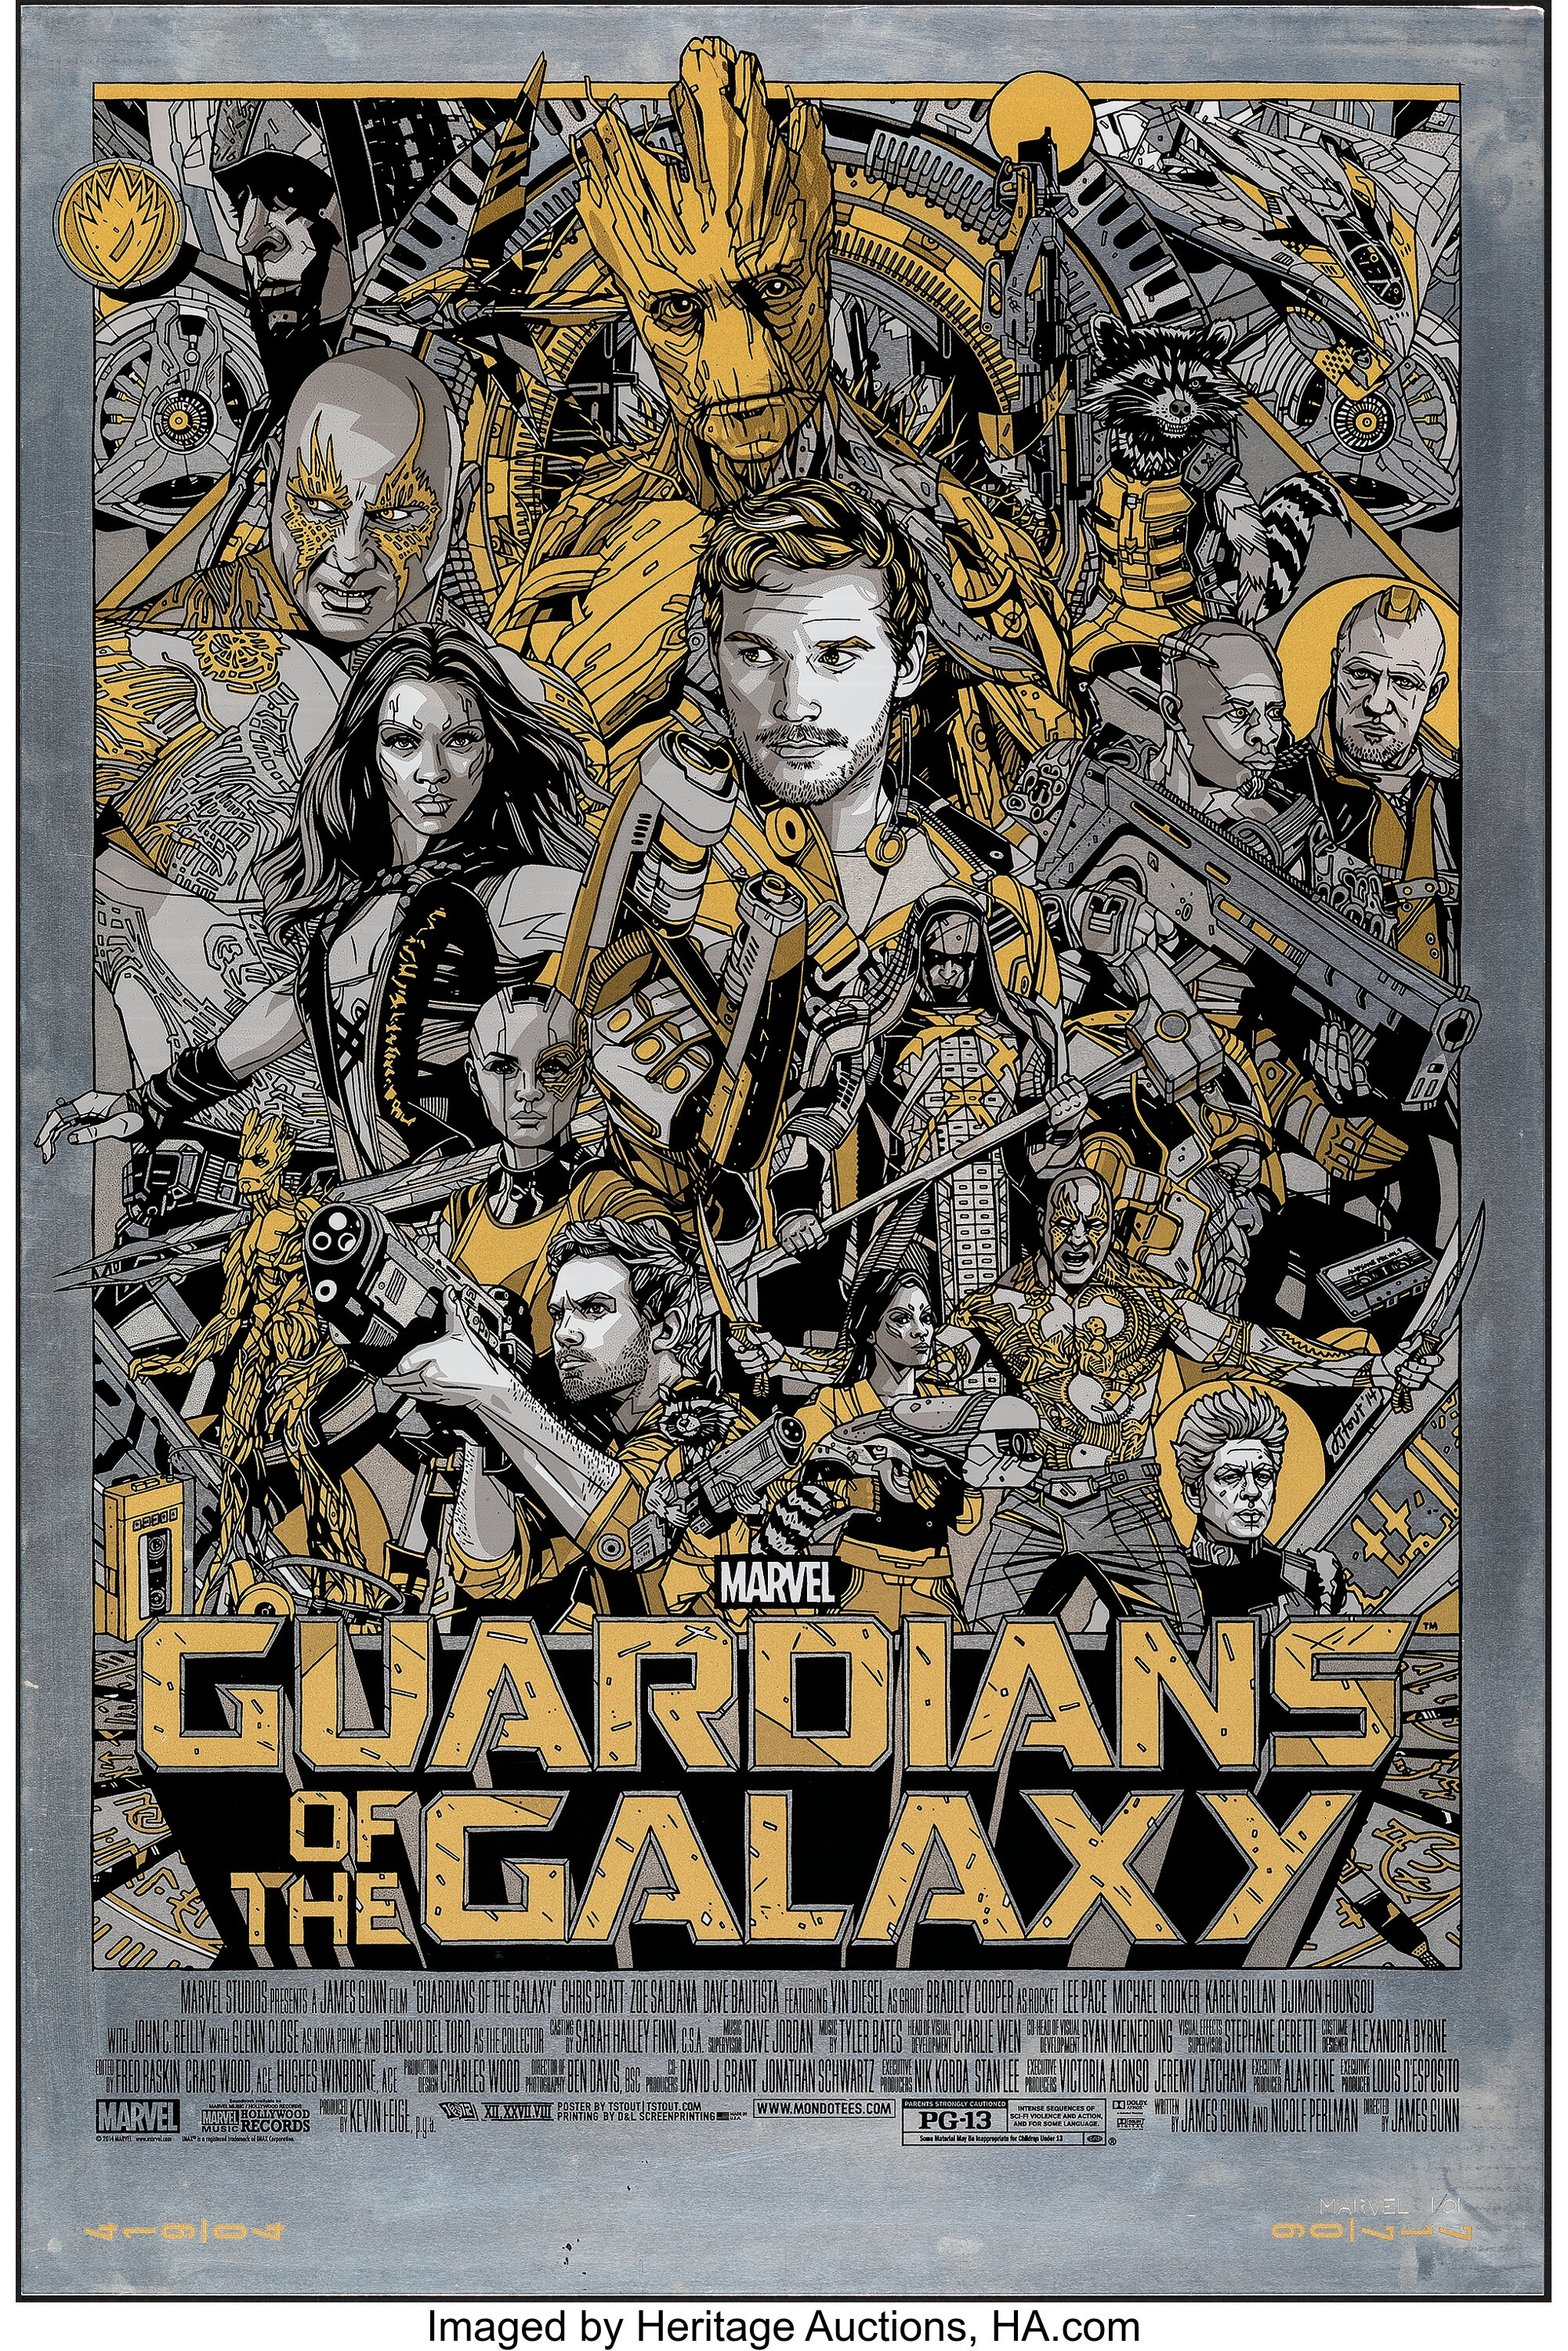 Guardians by the Stout 2014). Galaxy, Heritage Tyler | Lot | Auctions Mint. of (Mondo, 1/01 #8094